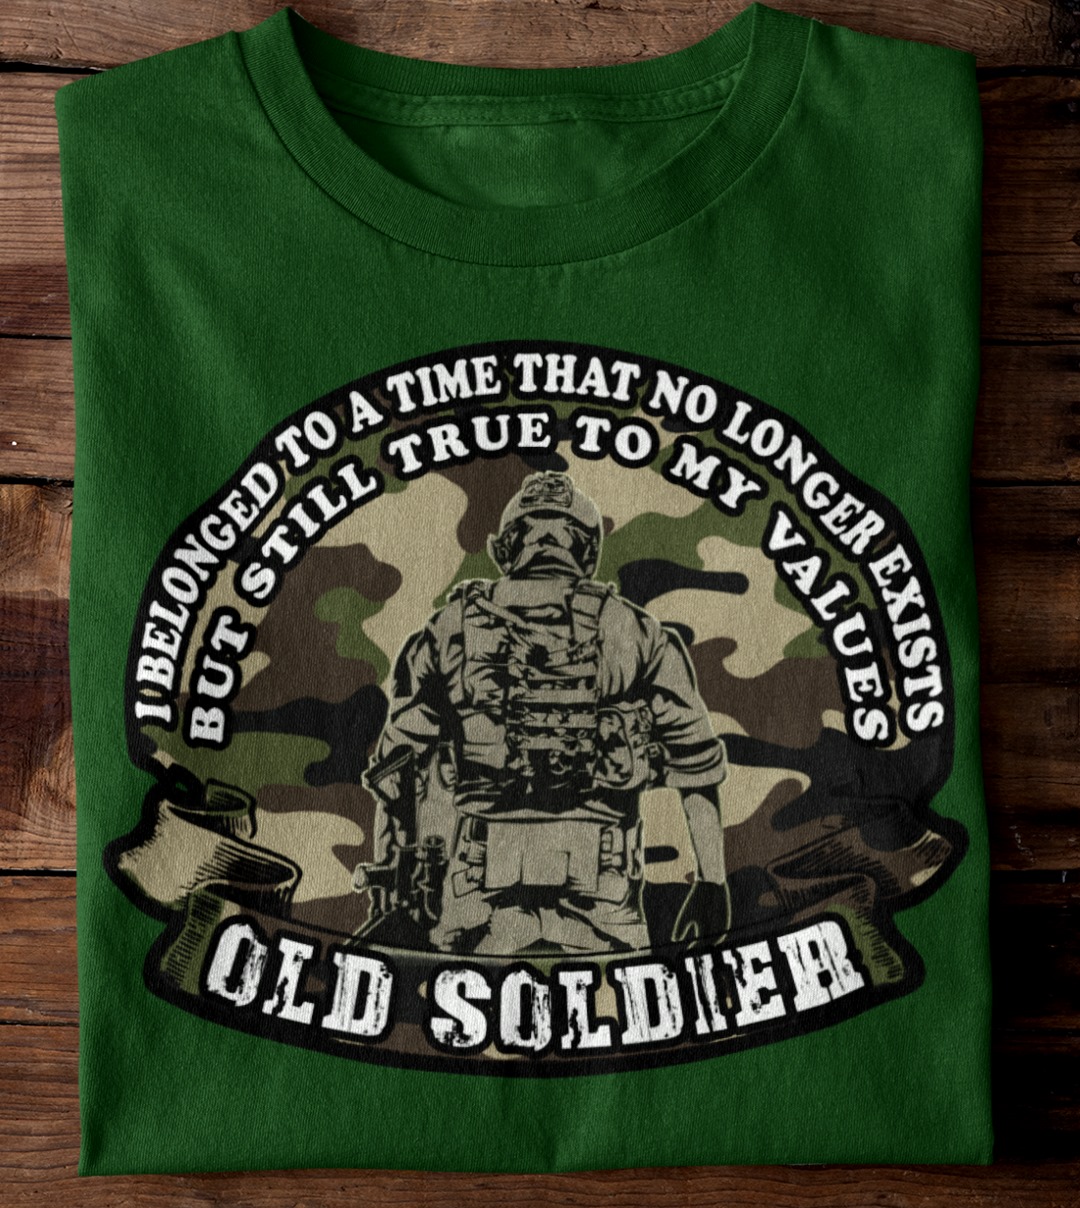 I belonged to a time that no longer exists but still true to my values - Old soldier